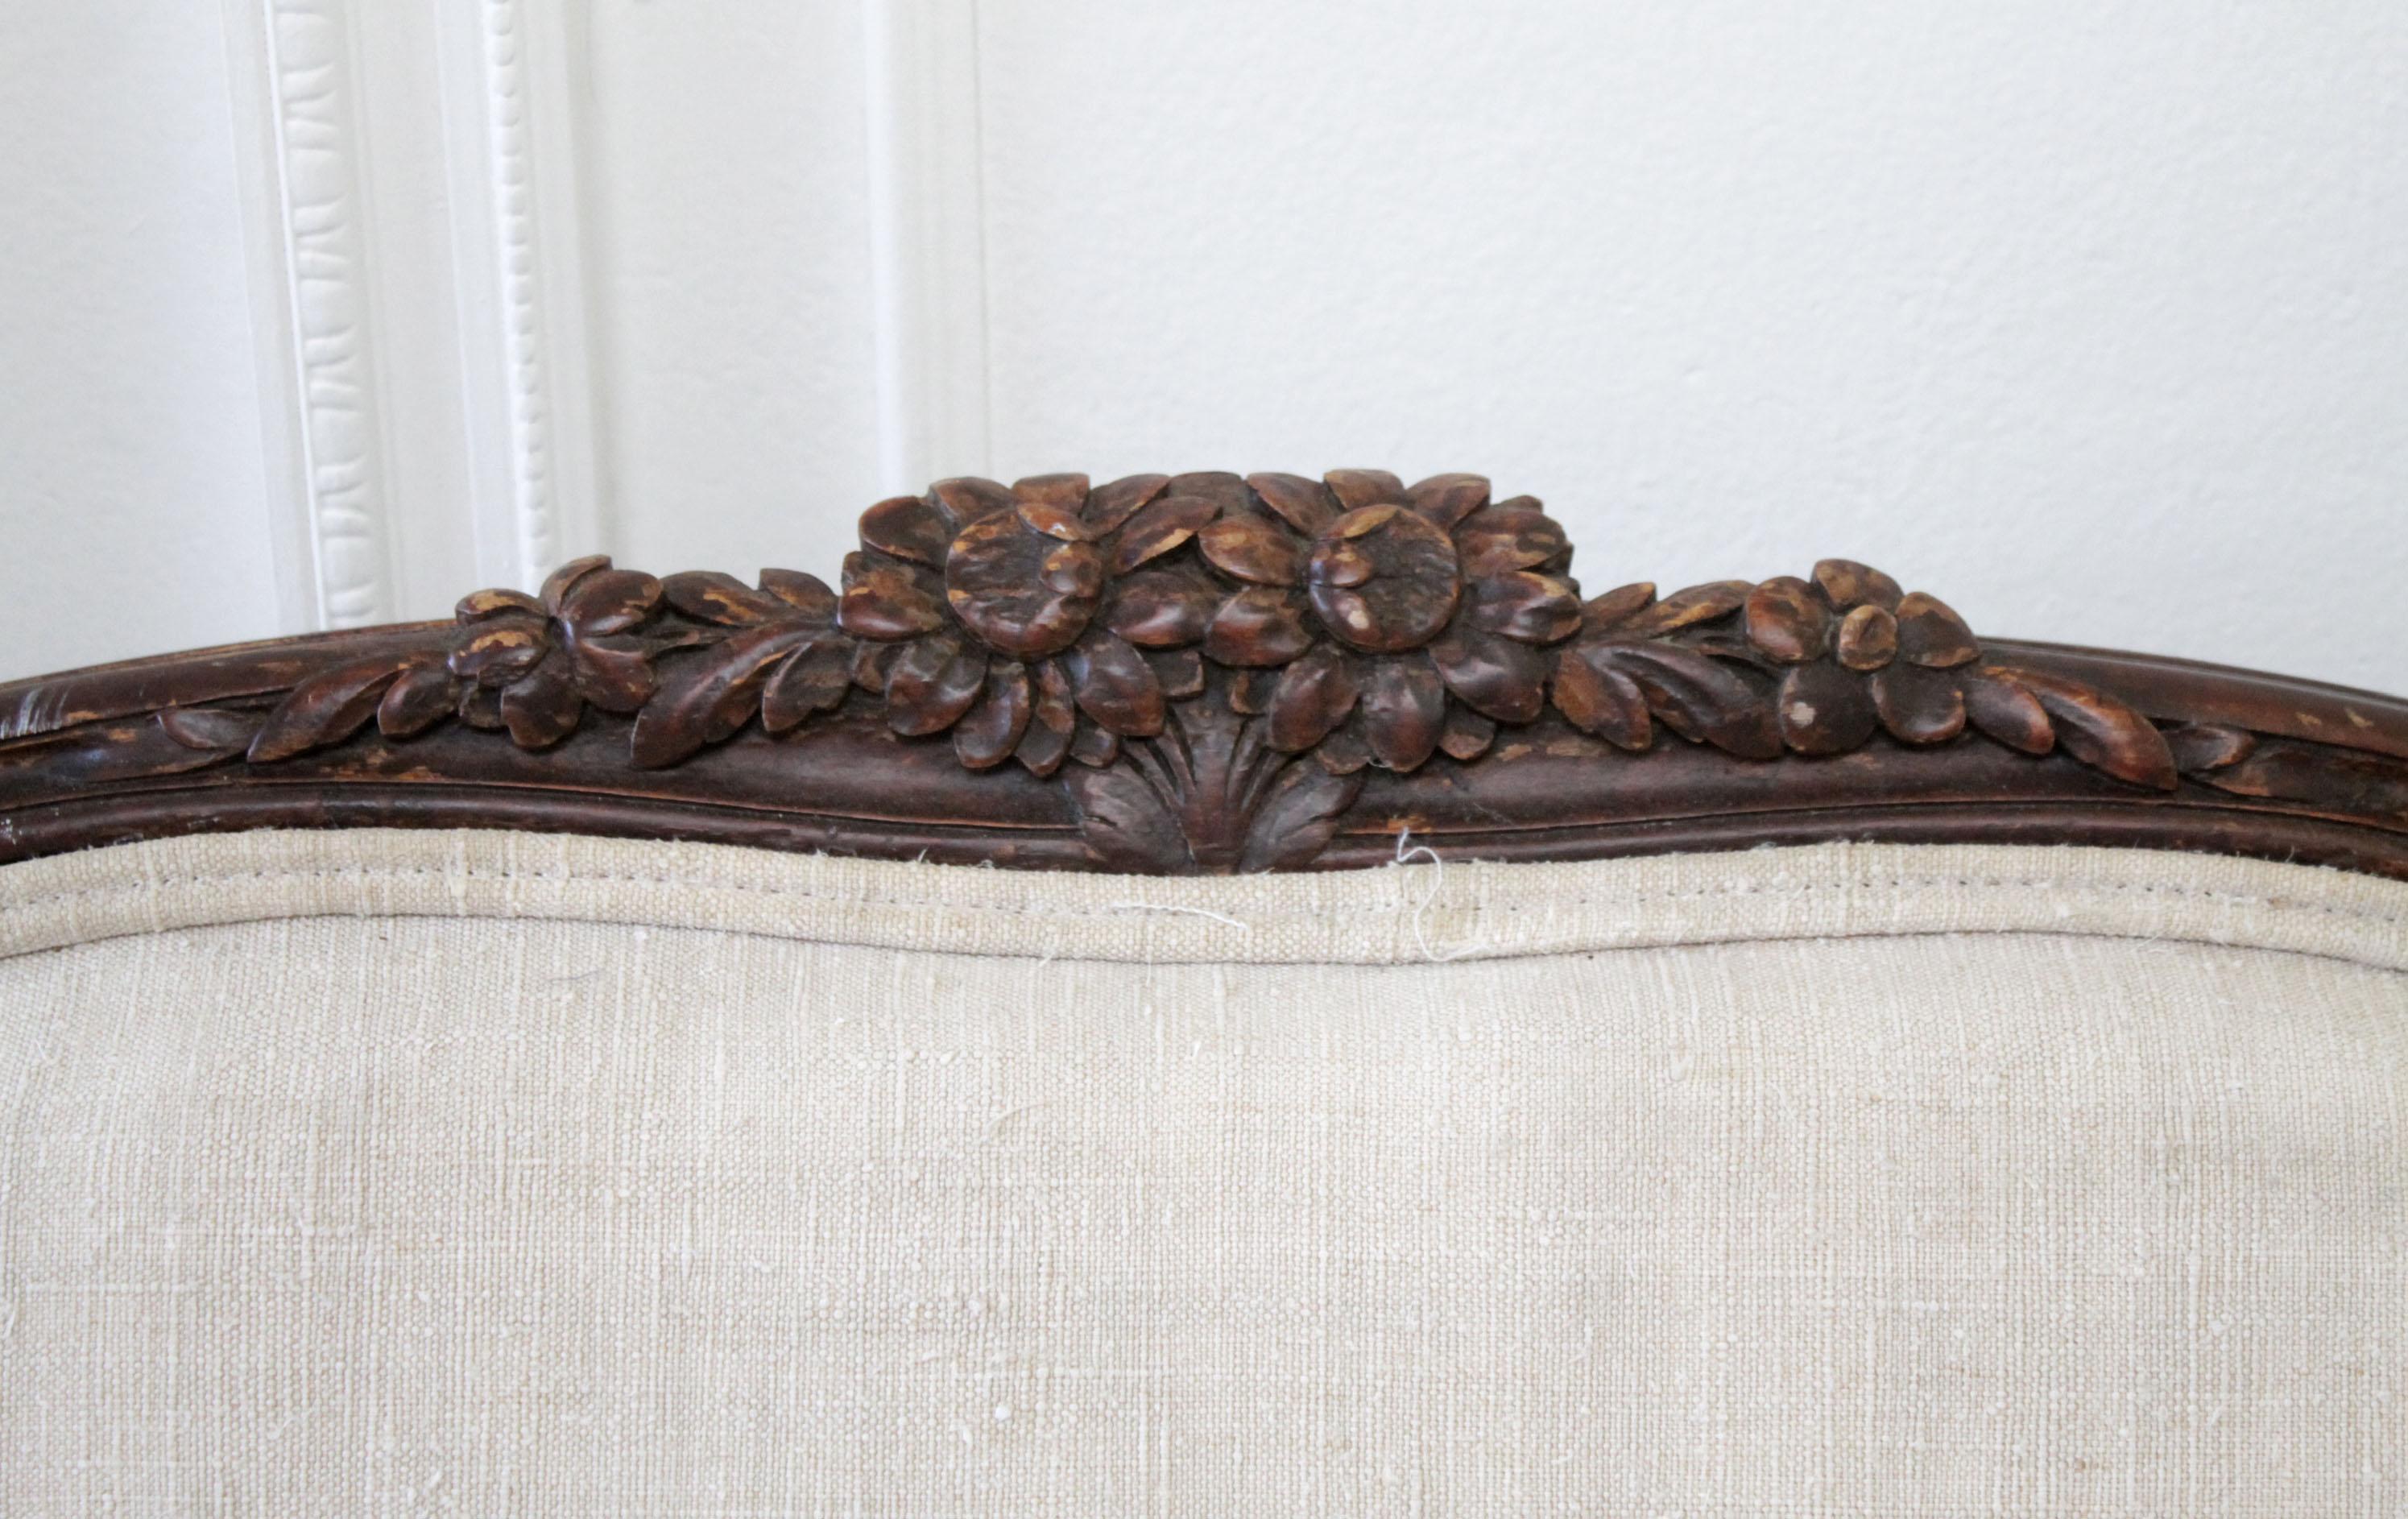 Late 19th century carved walnut sofa with antique French Grainsack upholstery
Measures: 81